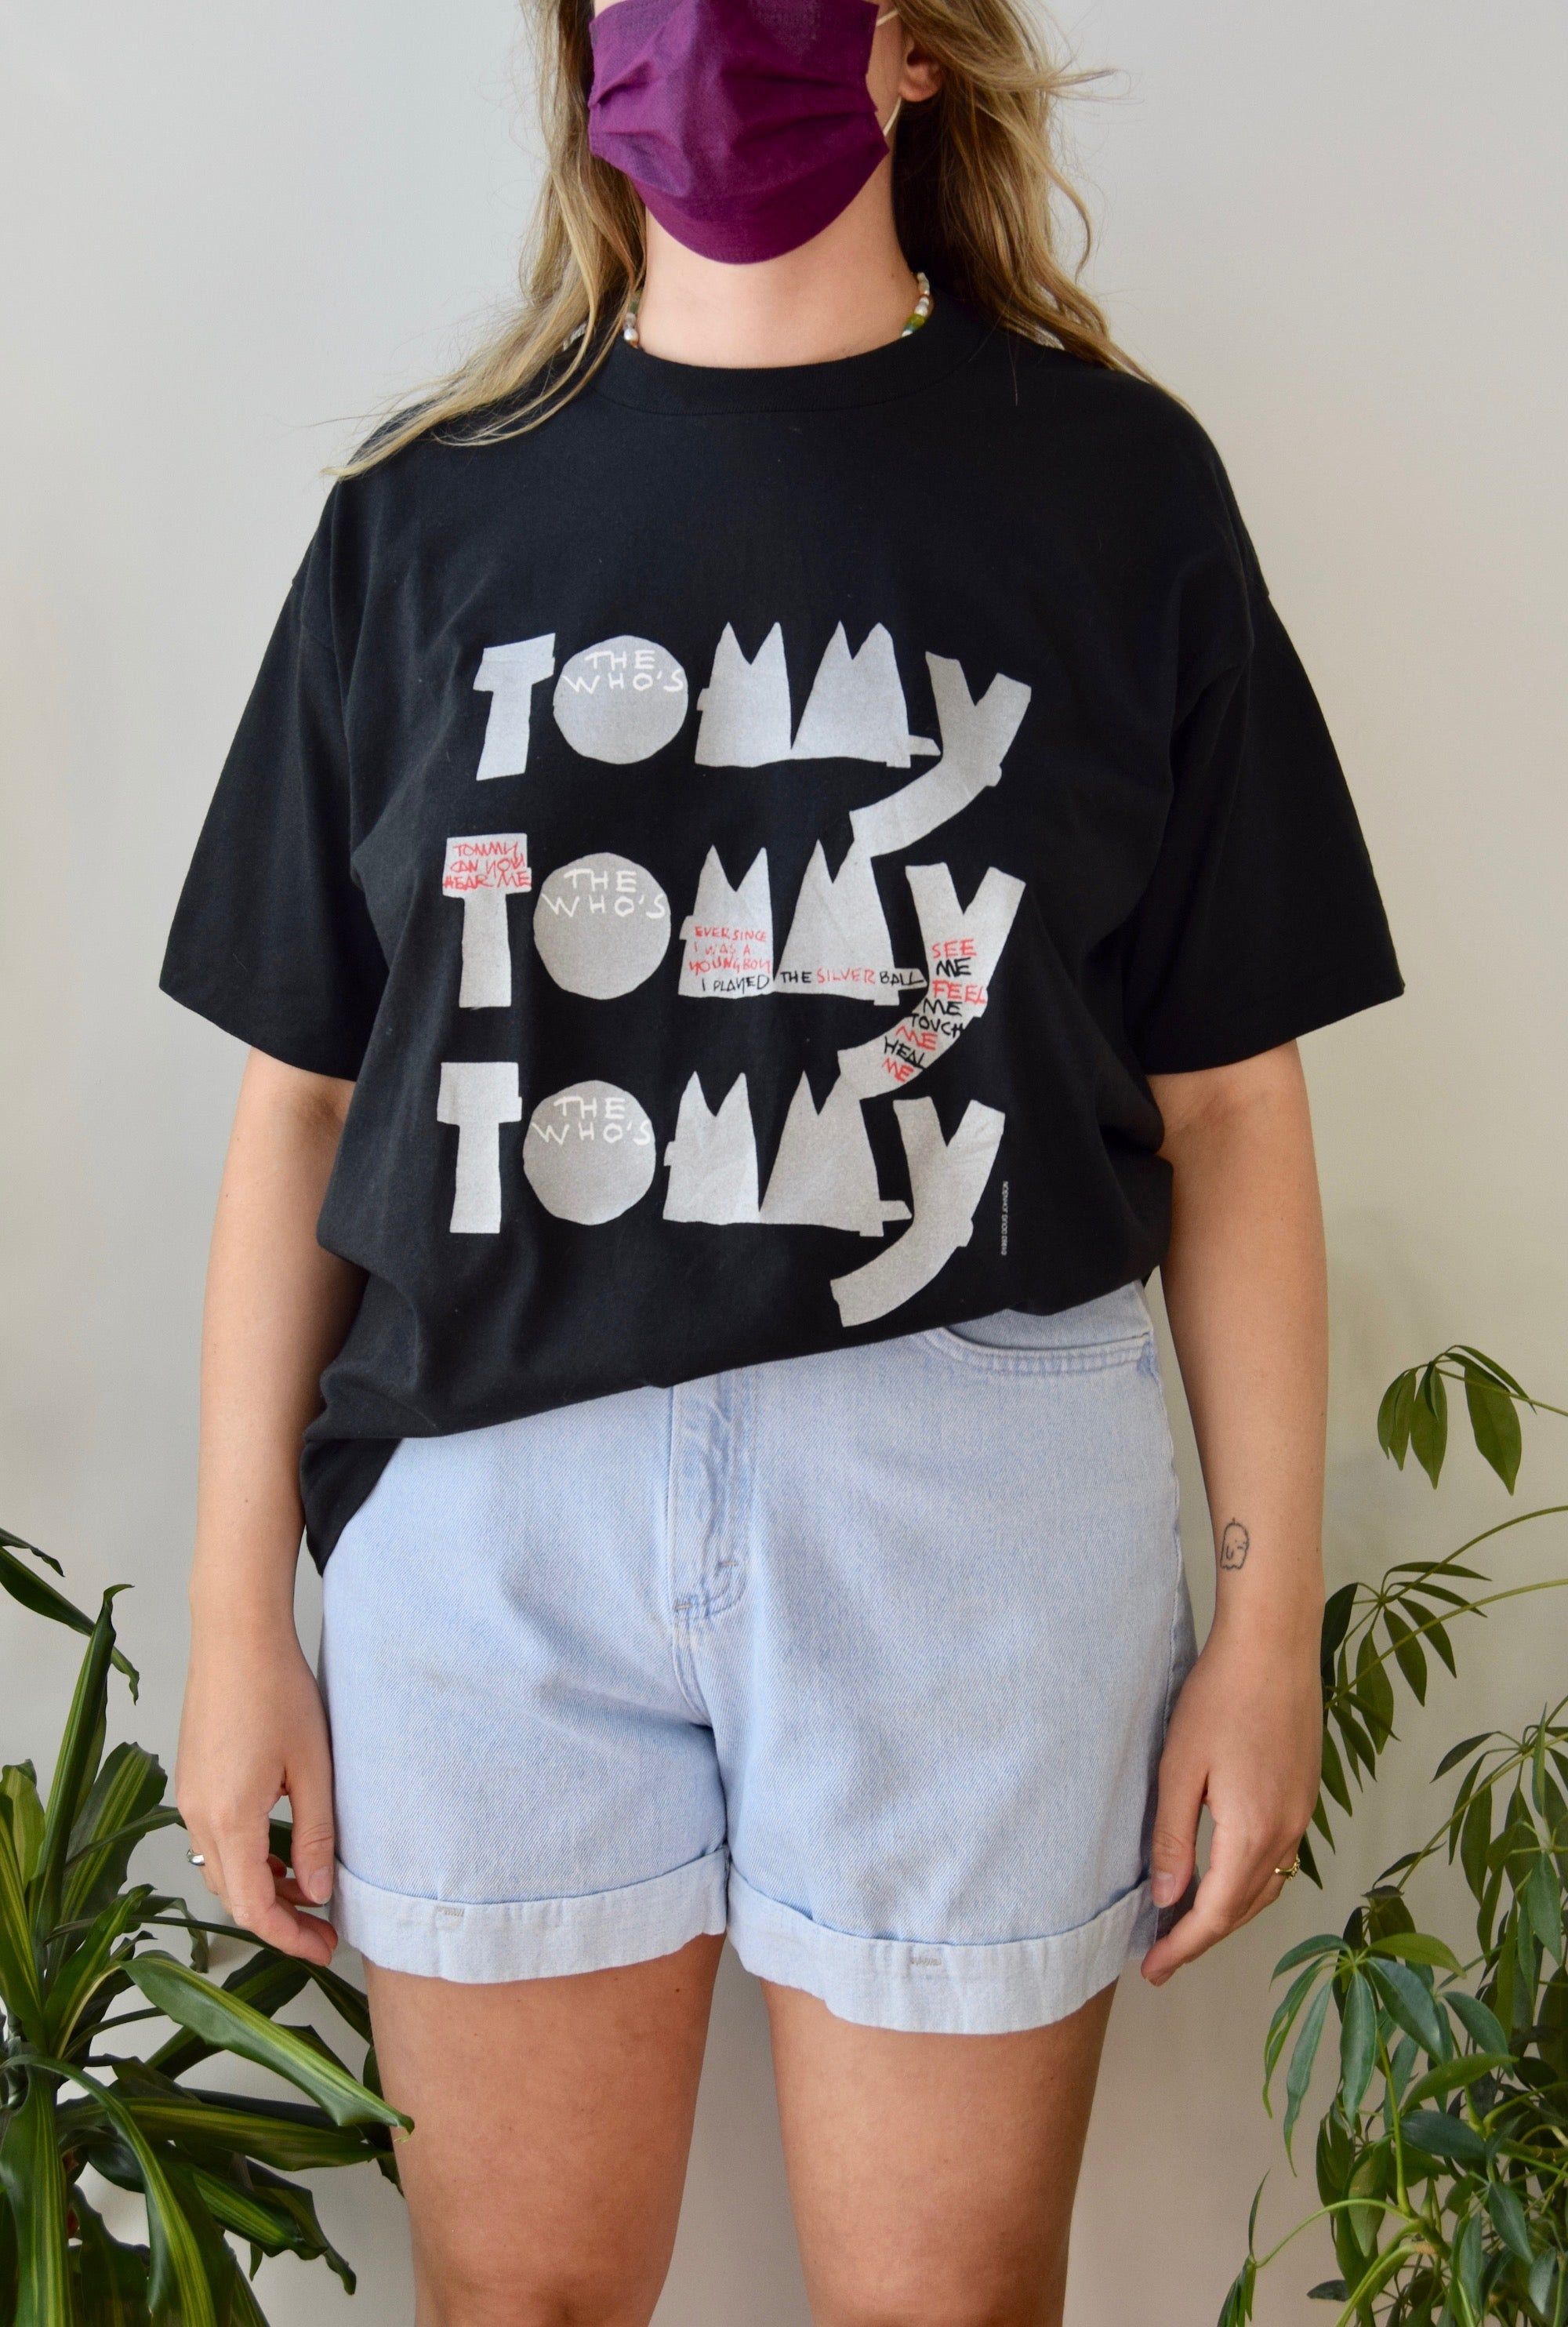 1993 "Tommy The Who" Musical T-Shirt